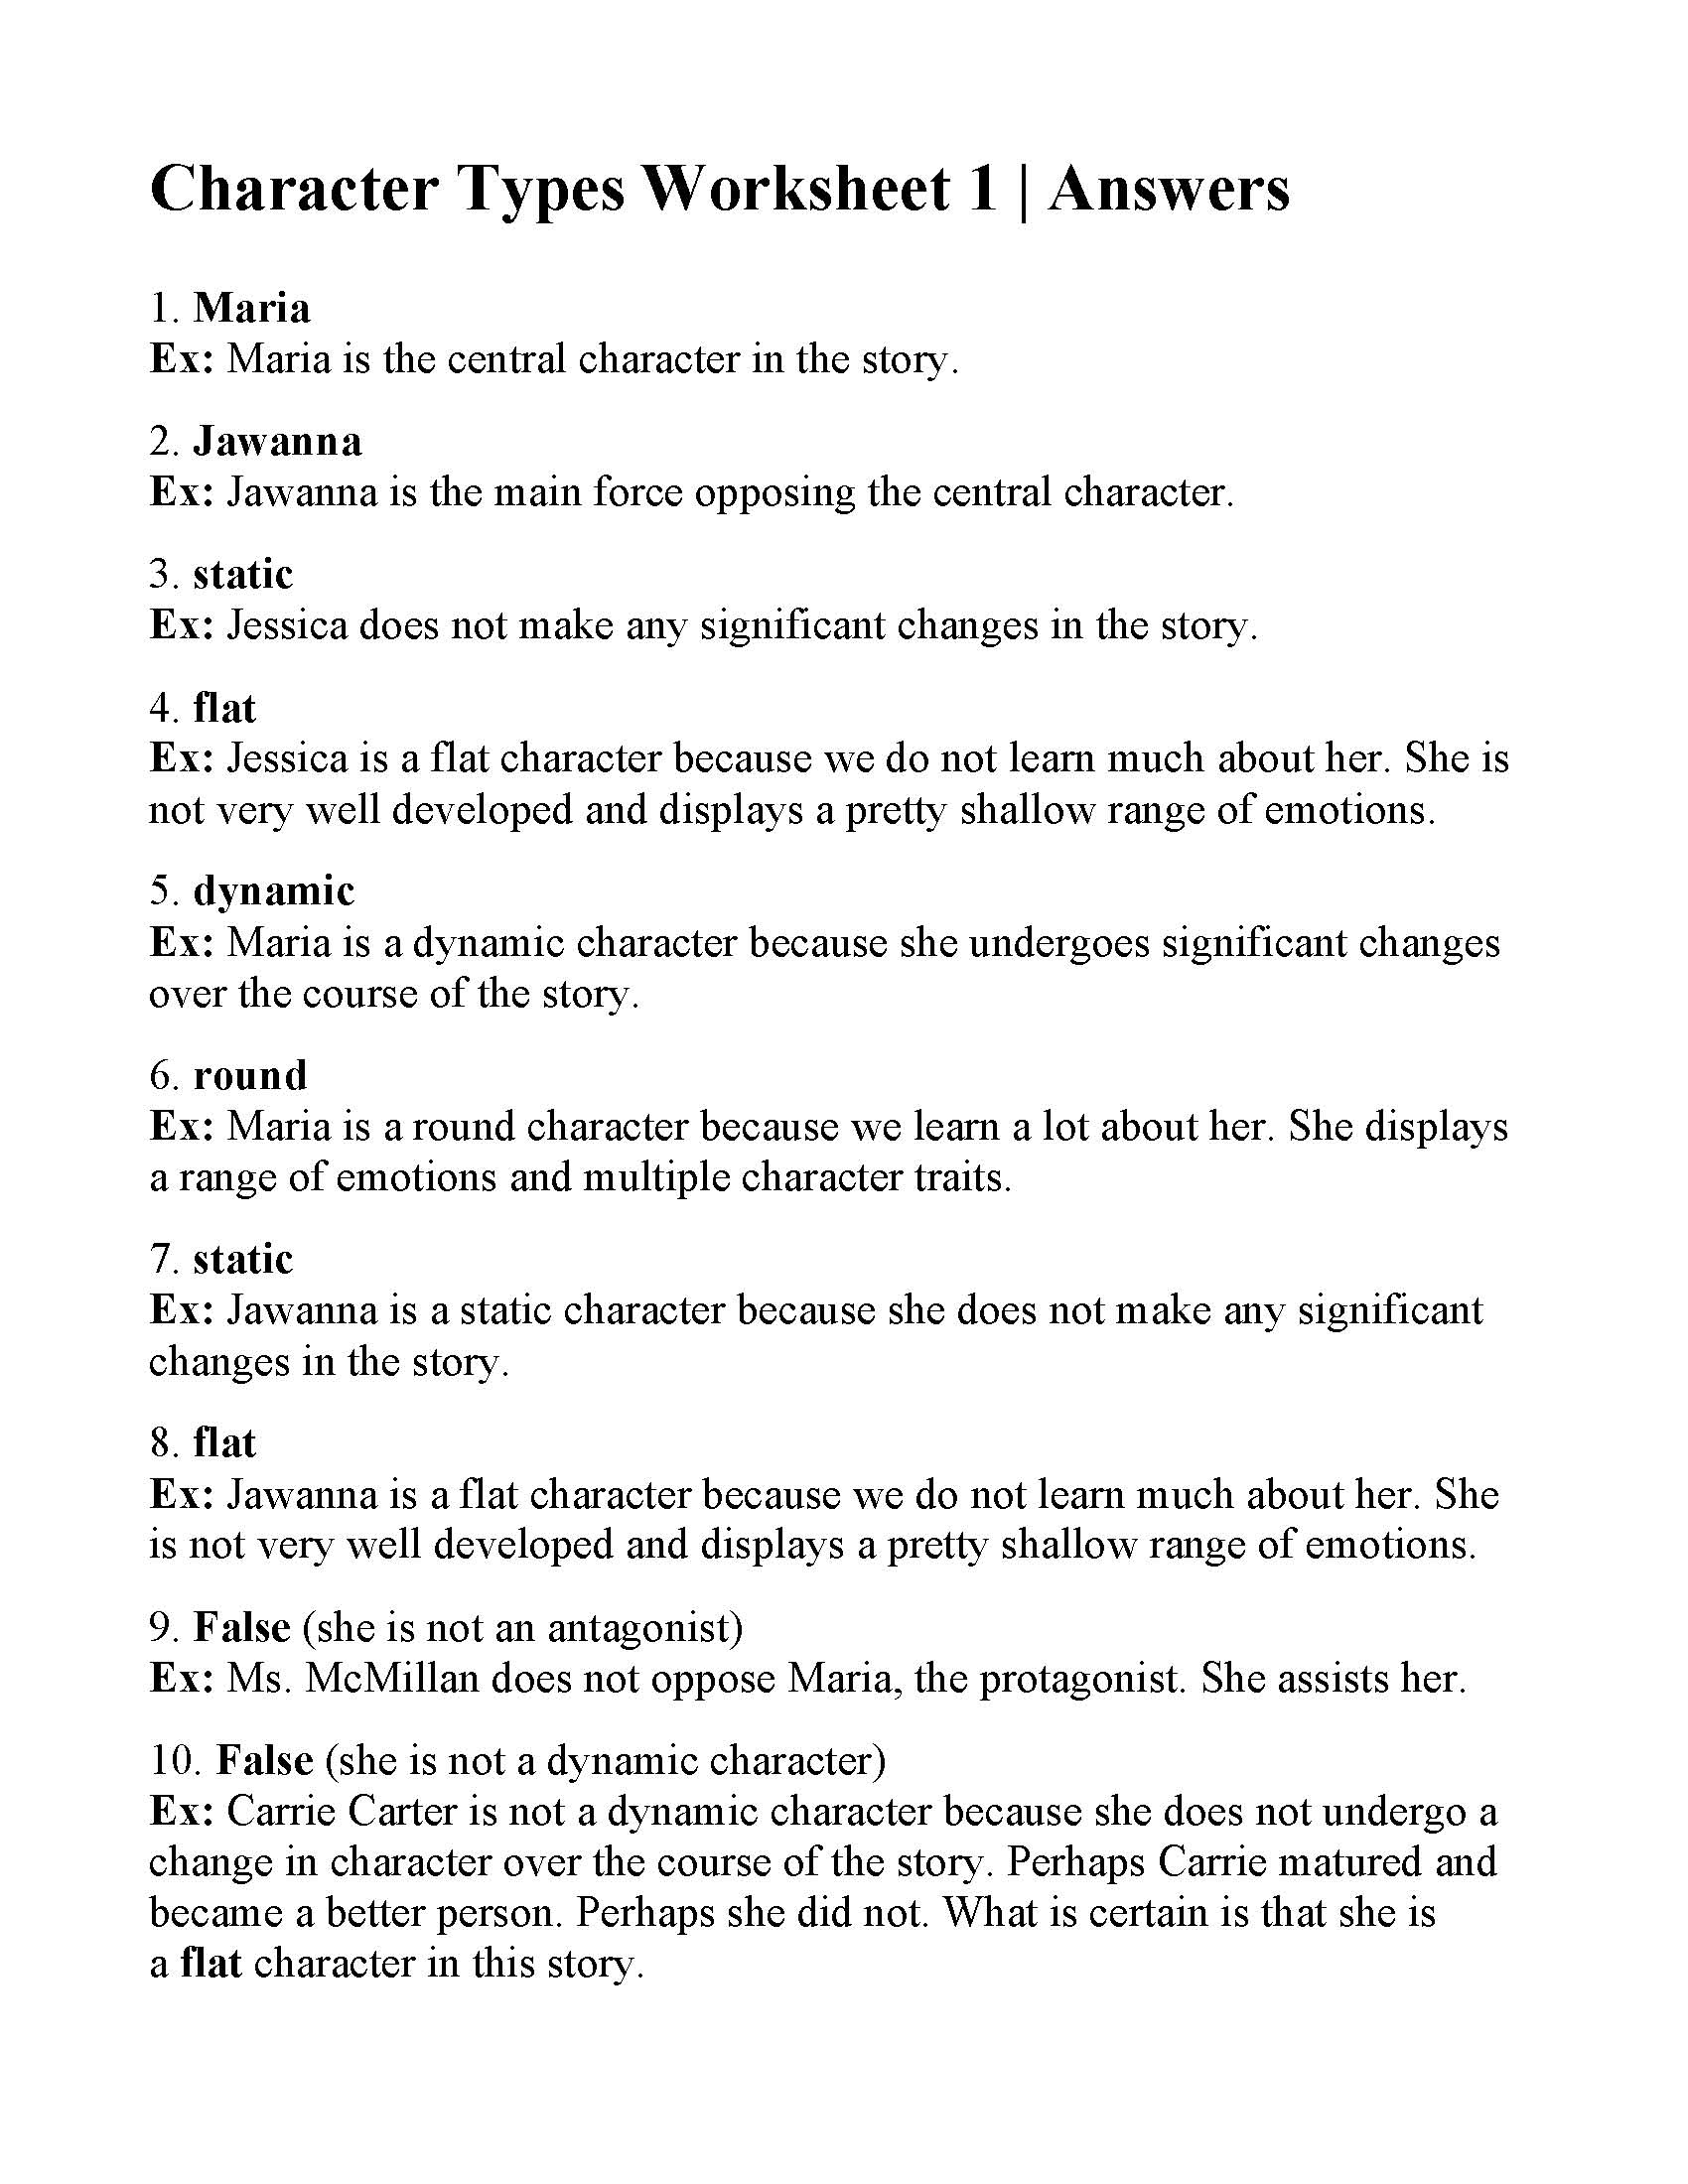 character-types-worksheet-1-reading-activity